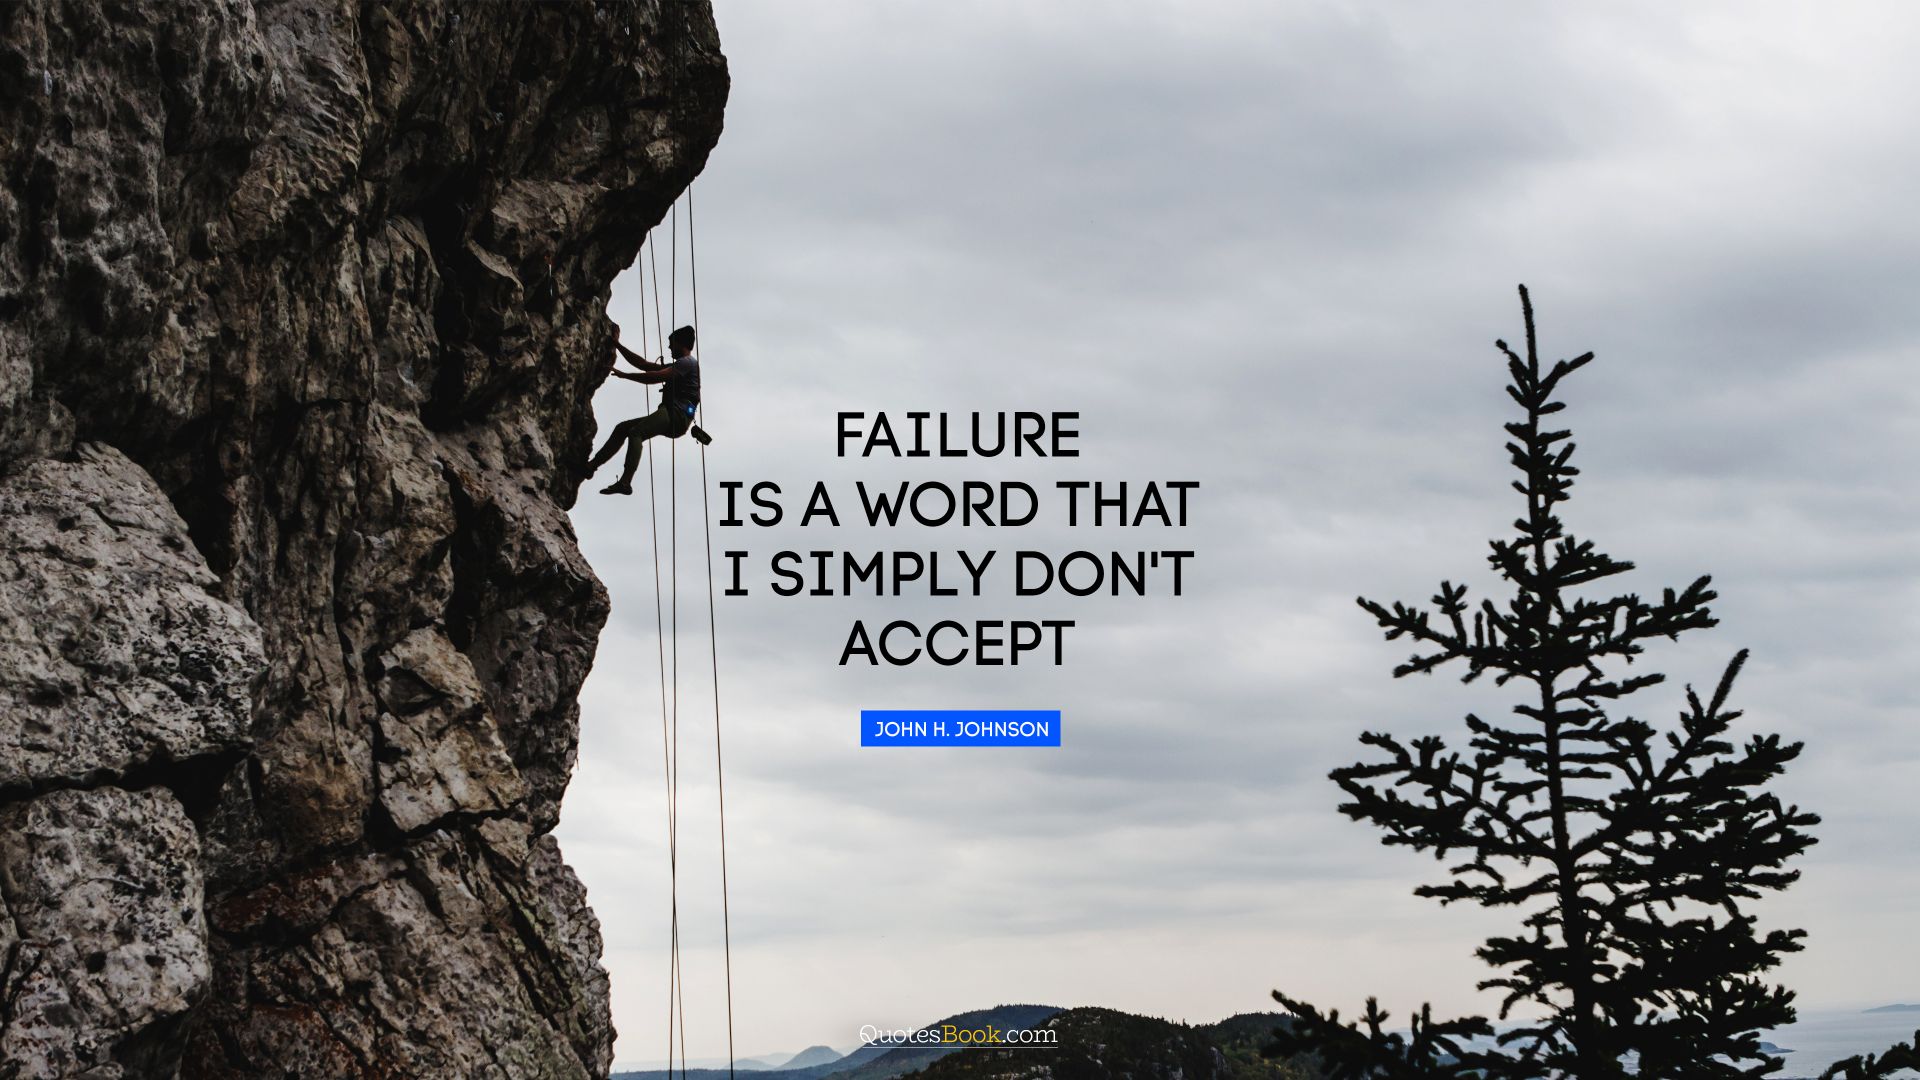 Failure is a word that I simply don't accept. - Quote by John H. Johnson